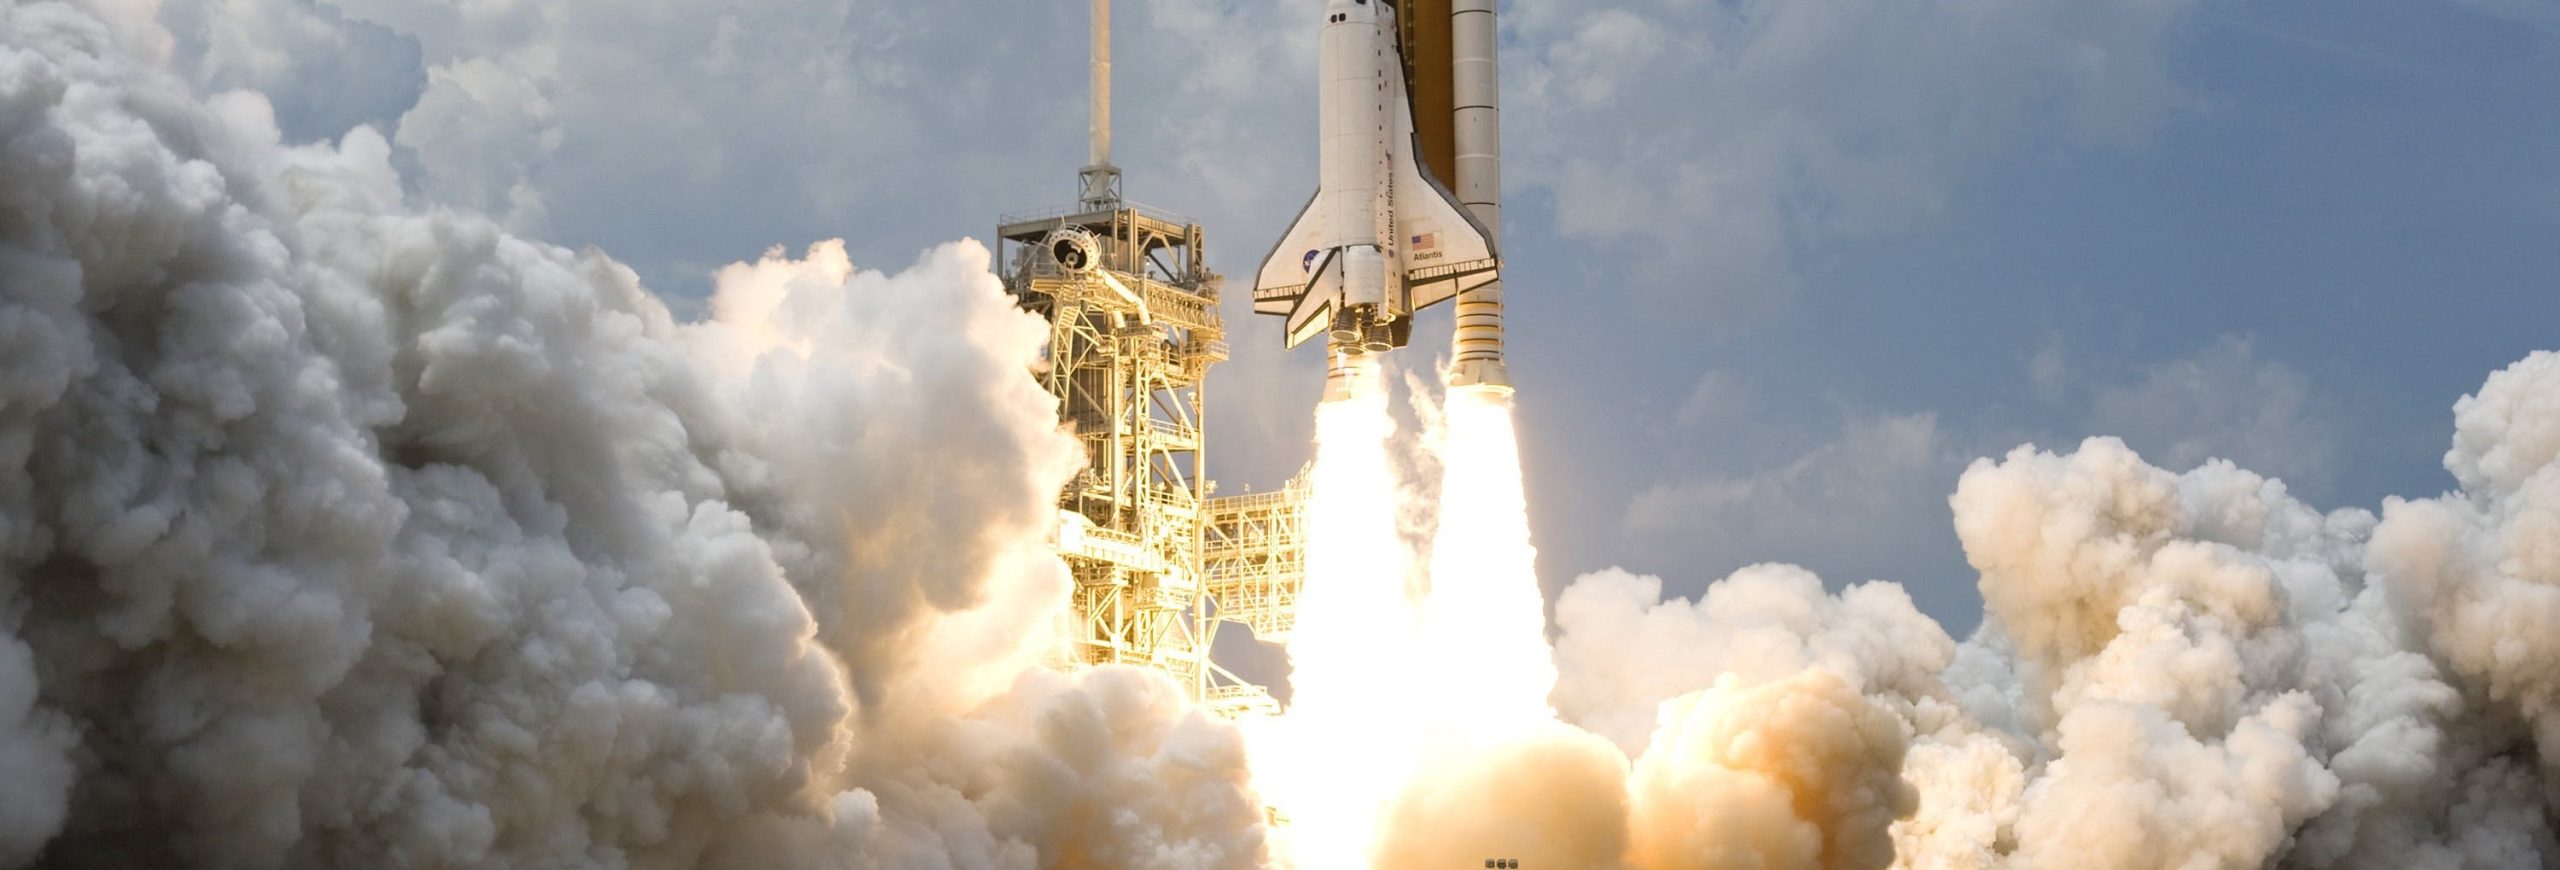 Affiliate Marketing Mistakes: Launch Hype